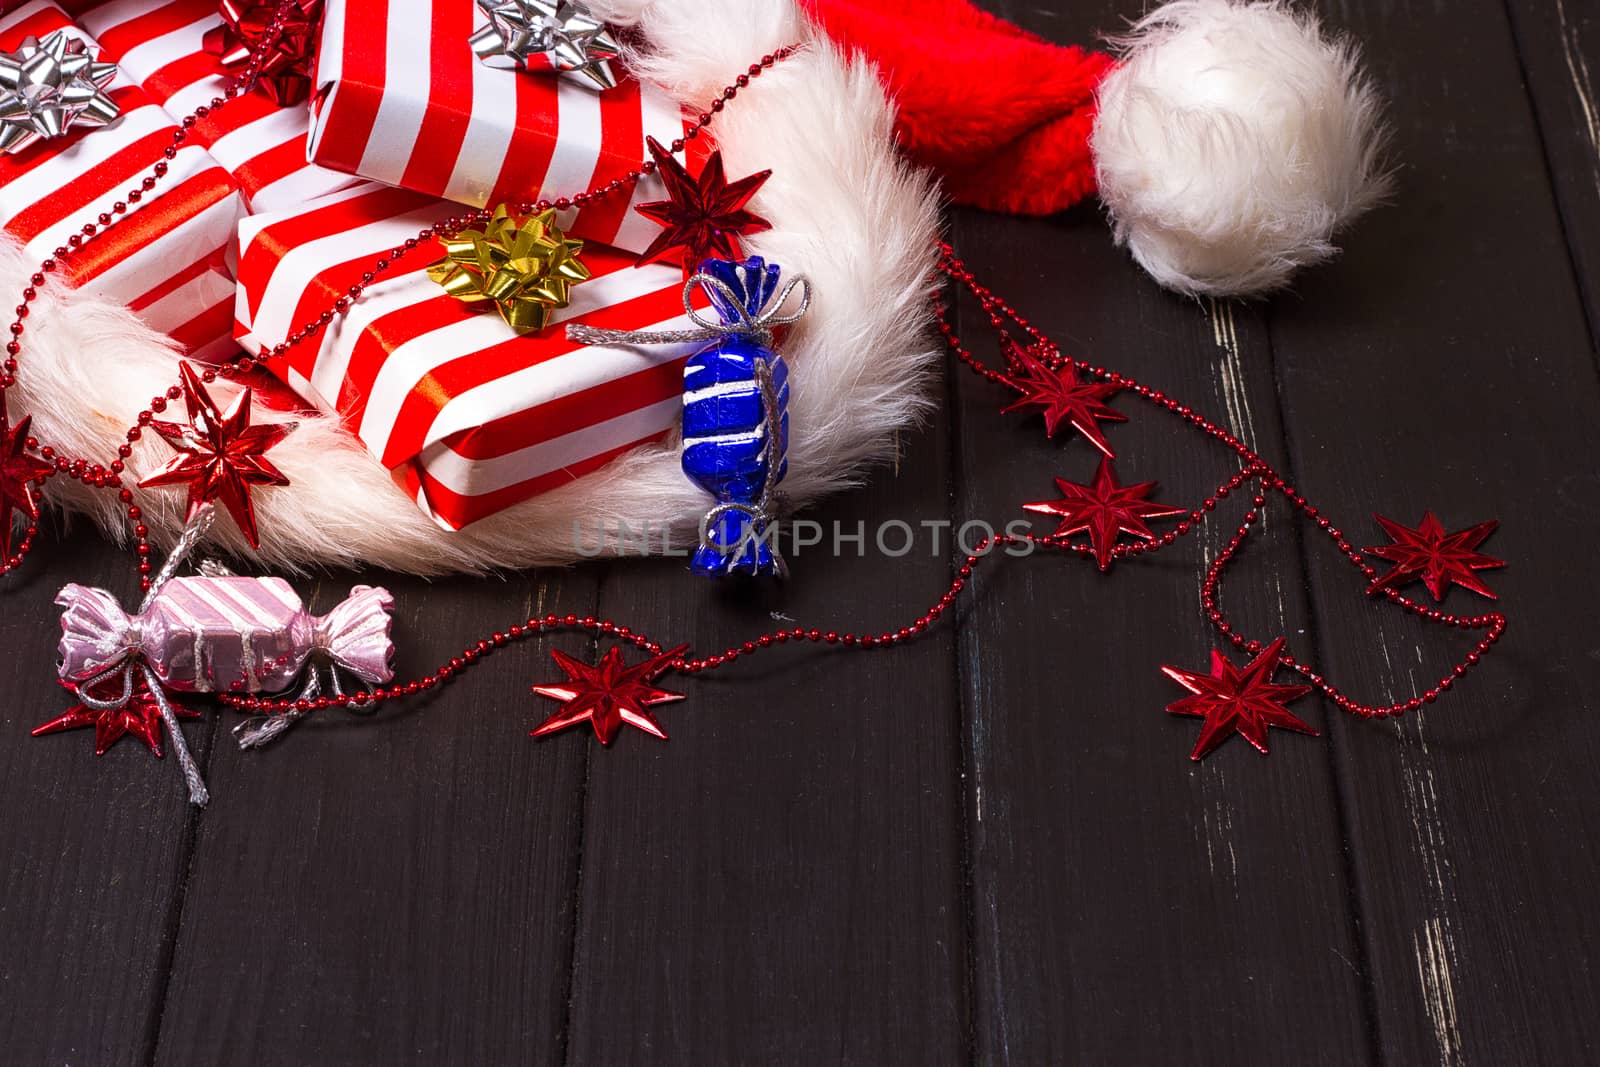 Christmas gifts in a Santa Claus hat on a black wooden background